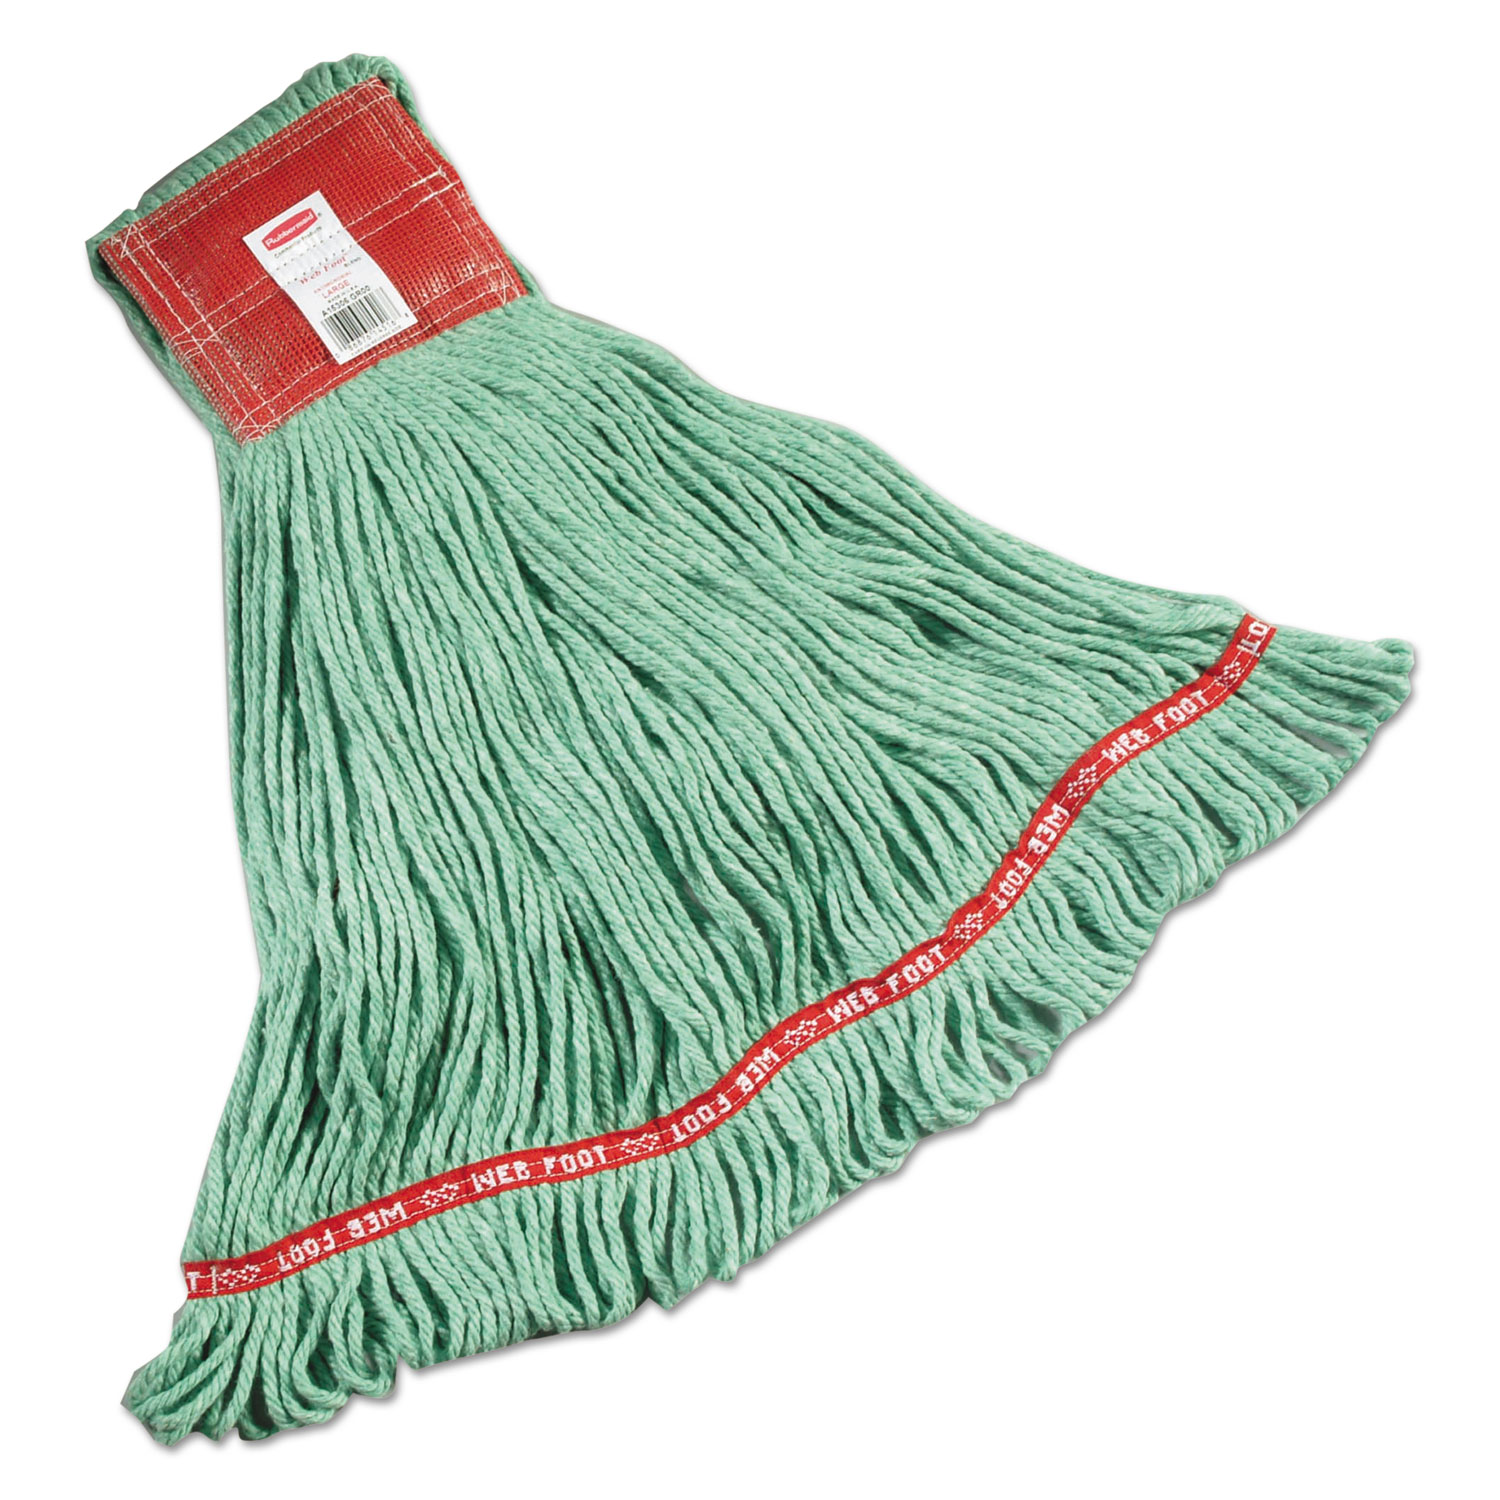  Rubbermaid Commercial FGA15306GR00 Web Foot Wet Mops, Cotton/Synthetic, Green, Large, 5-in. Red Headband,  6/Carton (RCPA153GRE) 